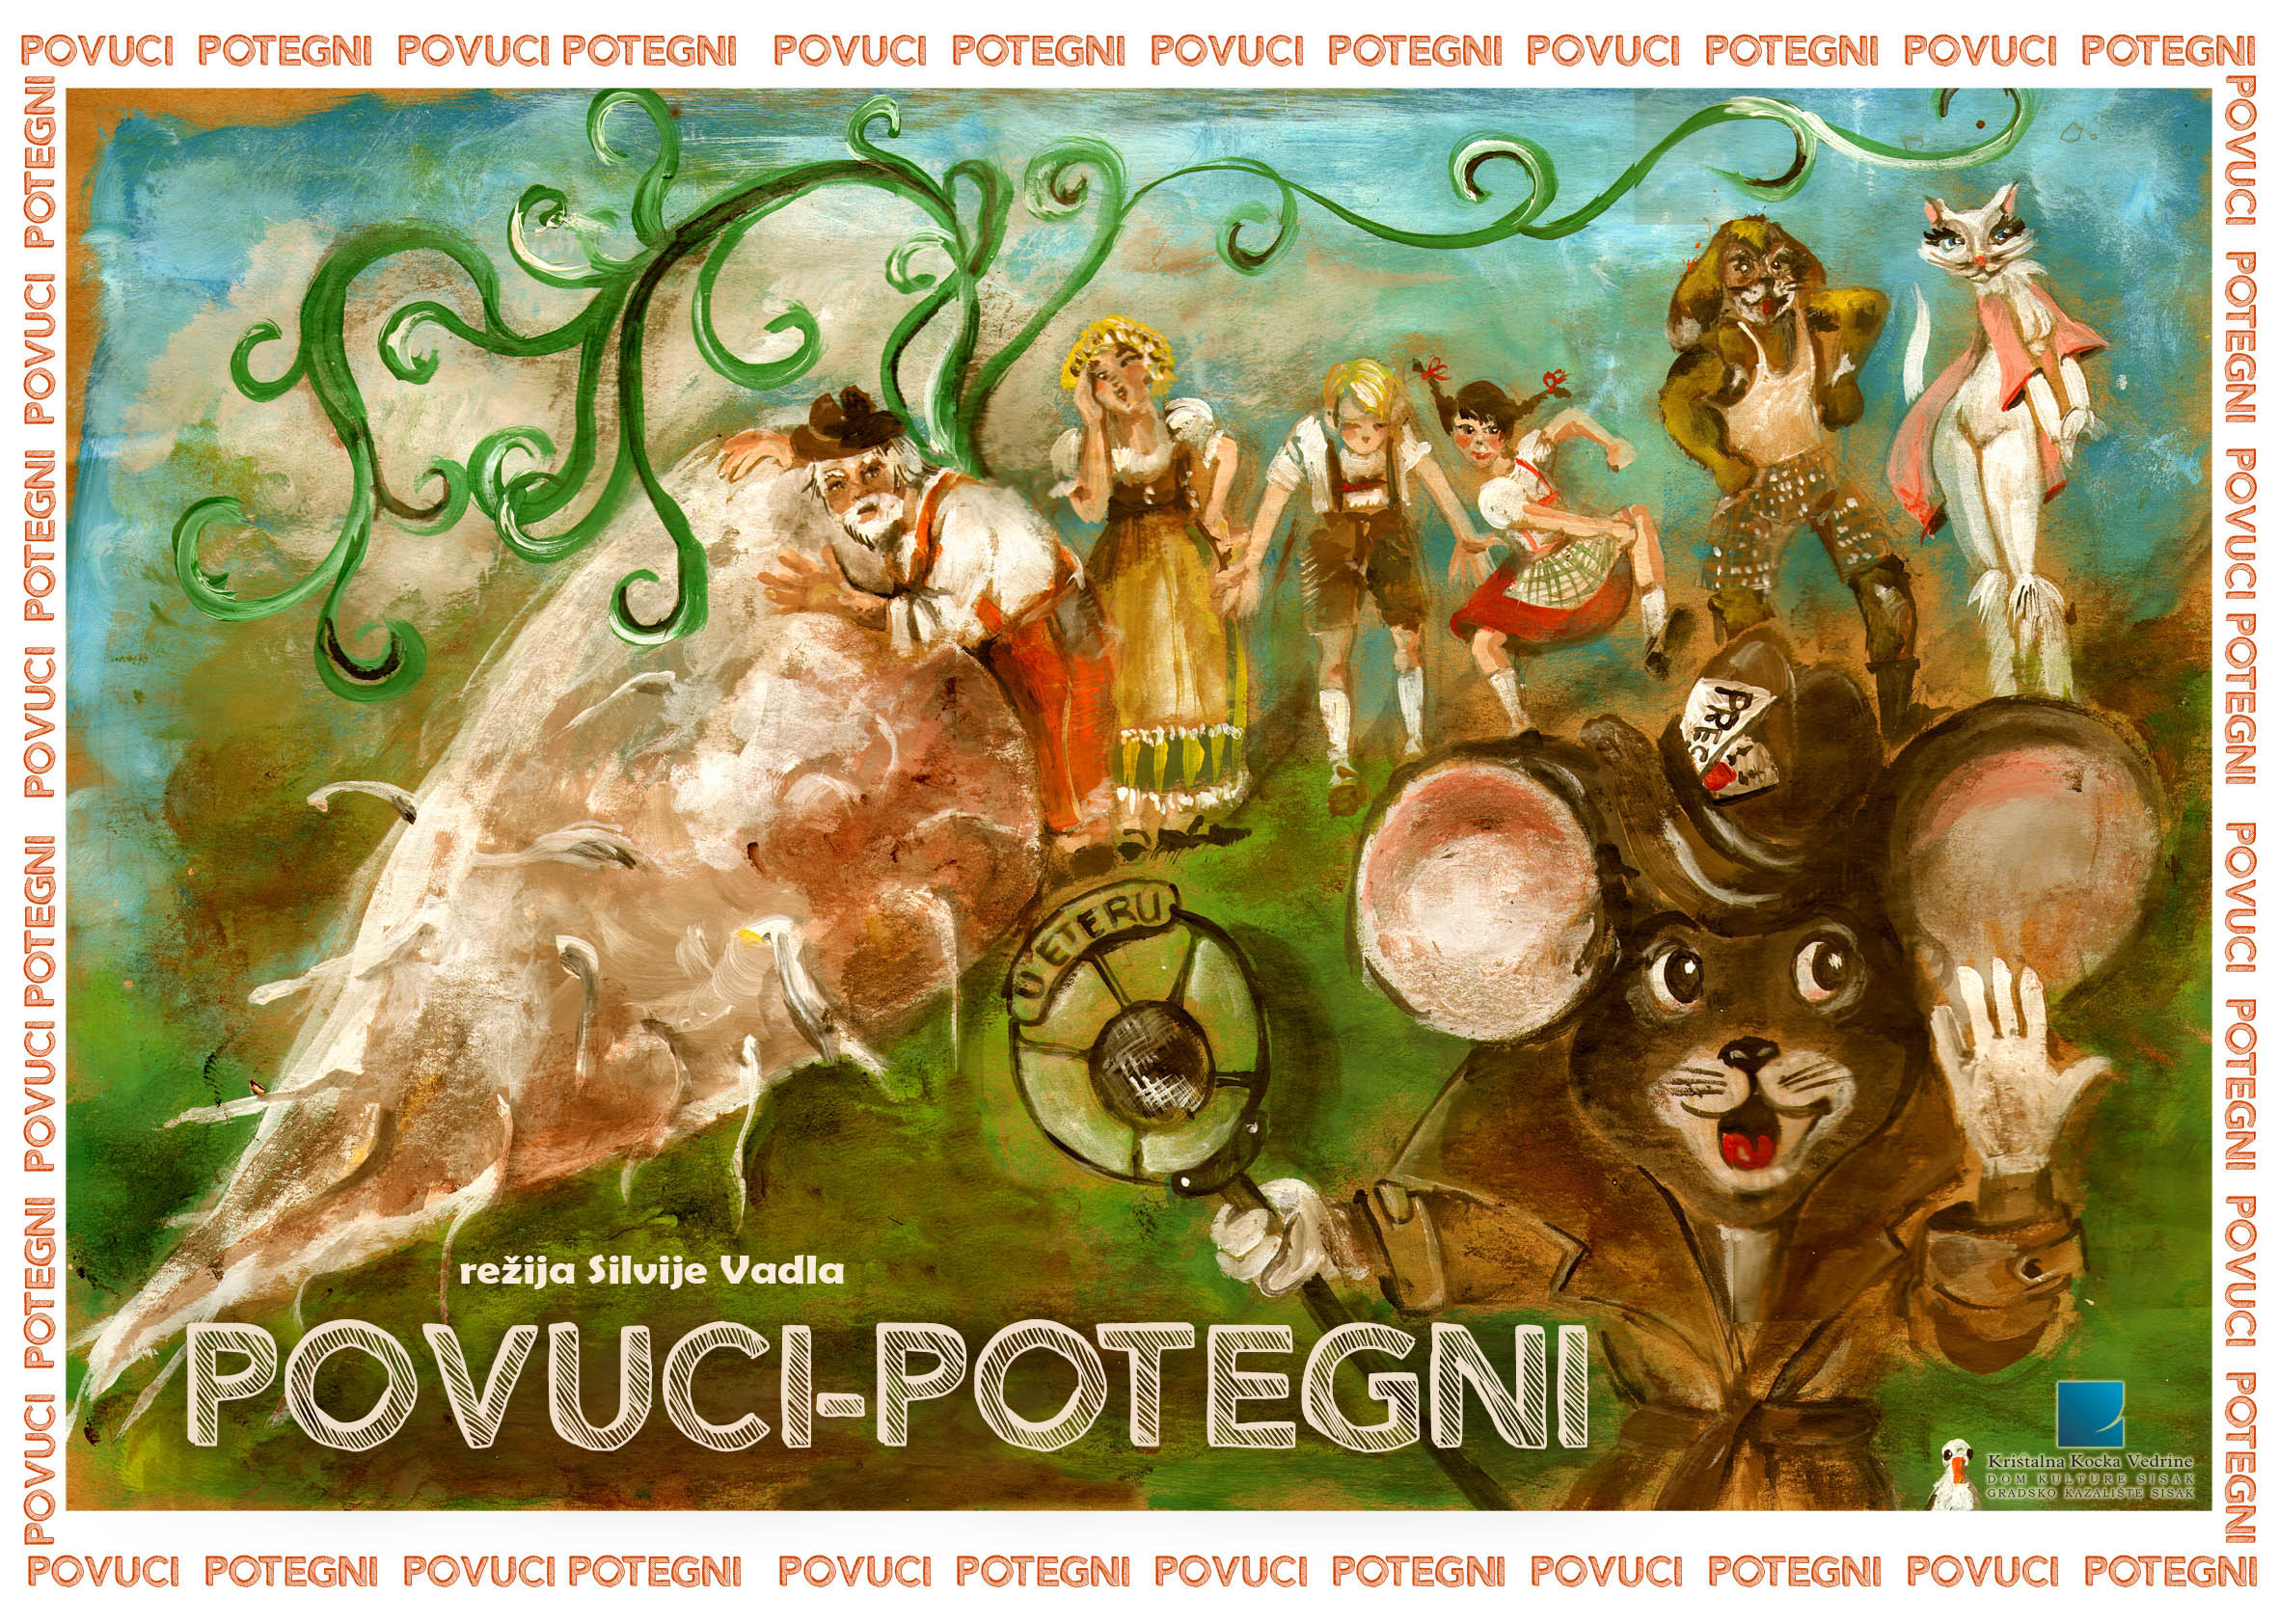 You are currently viewing “Povuci-potegni”